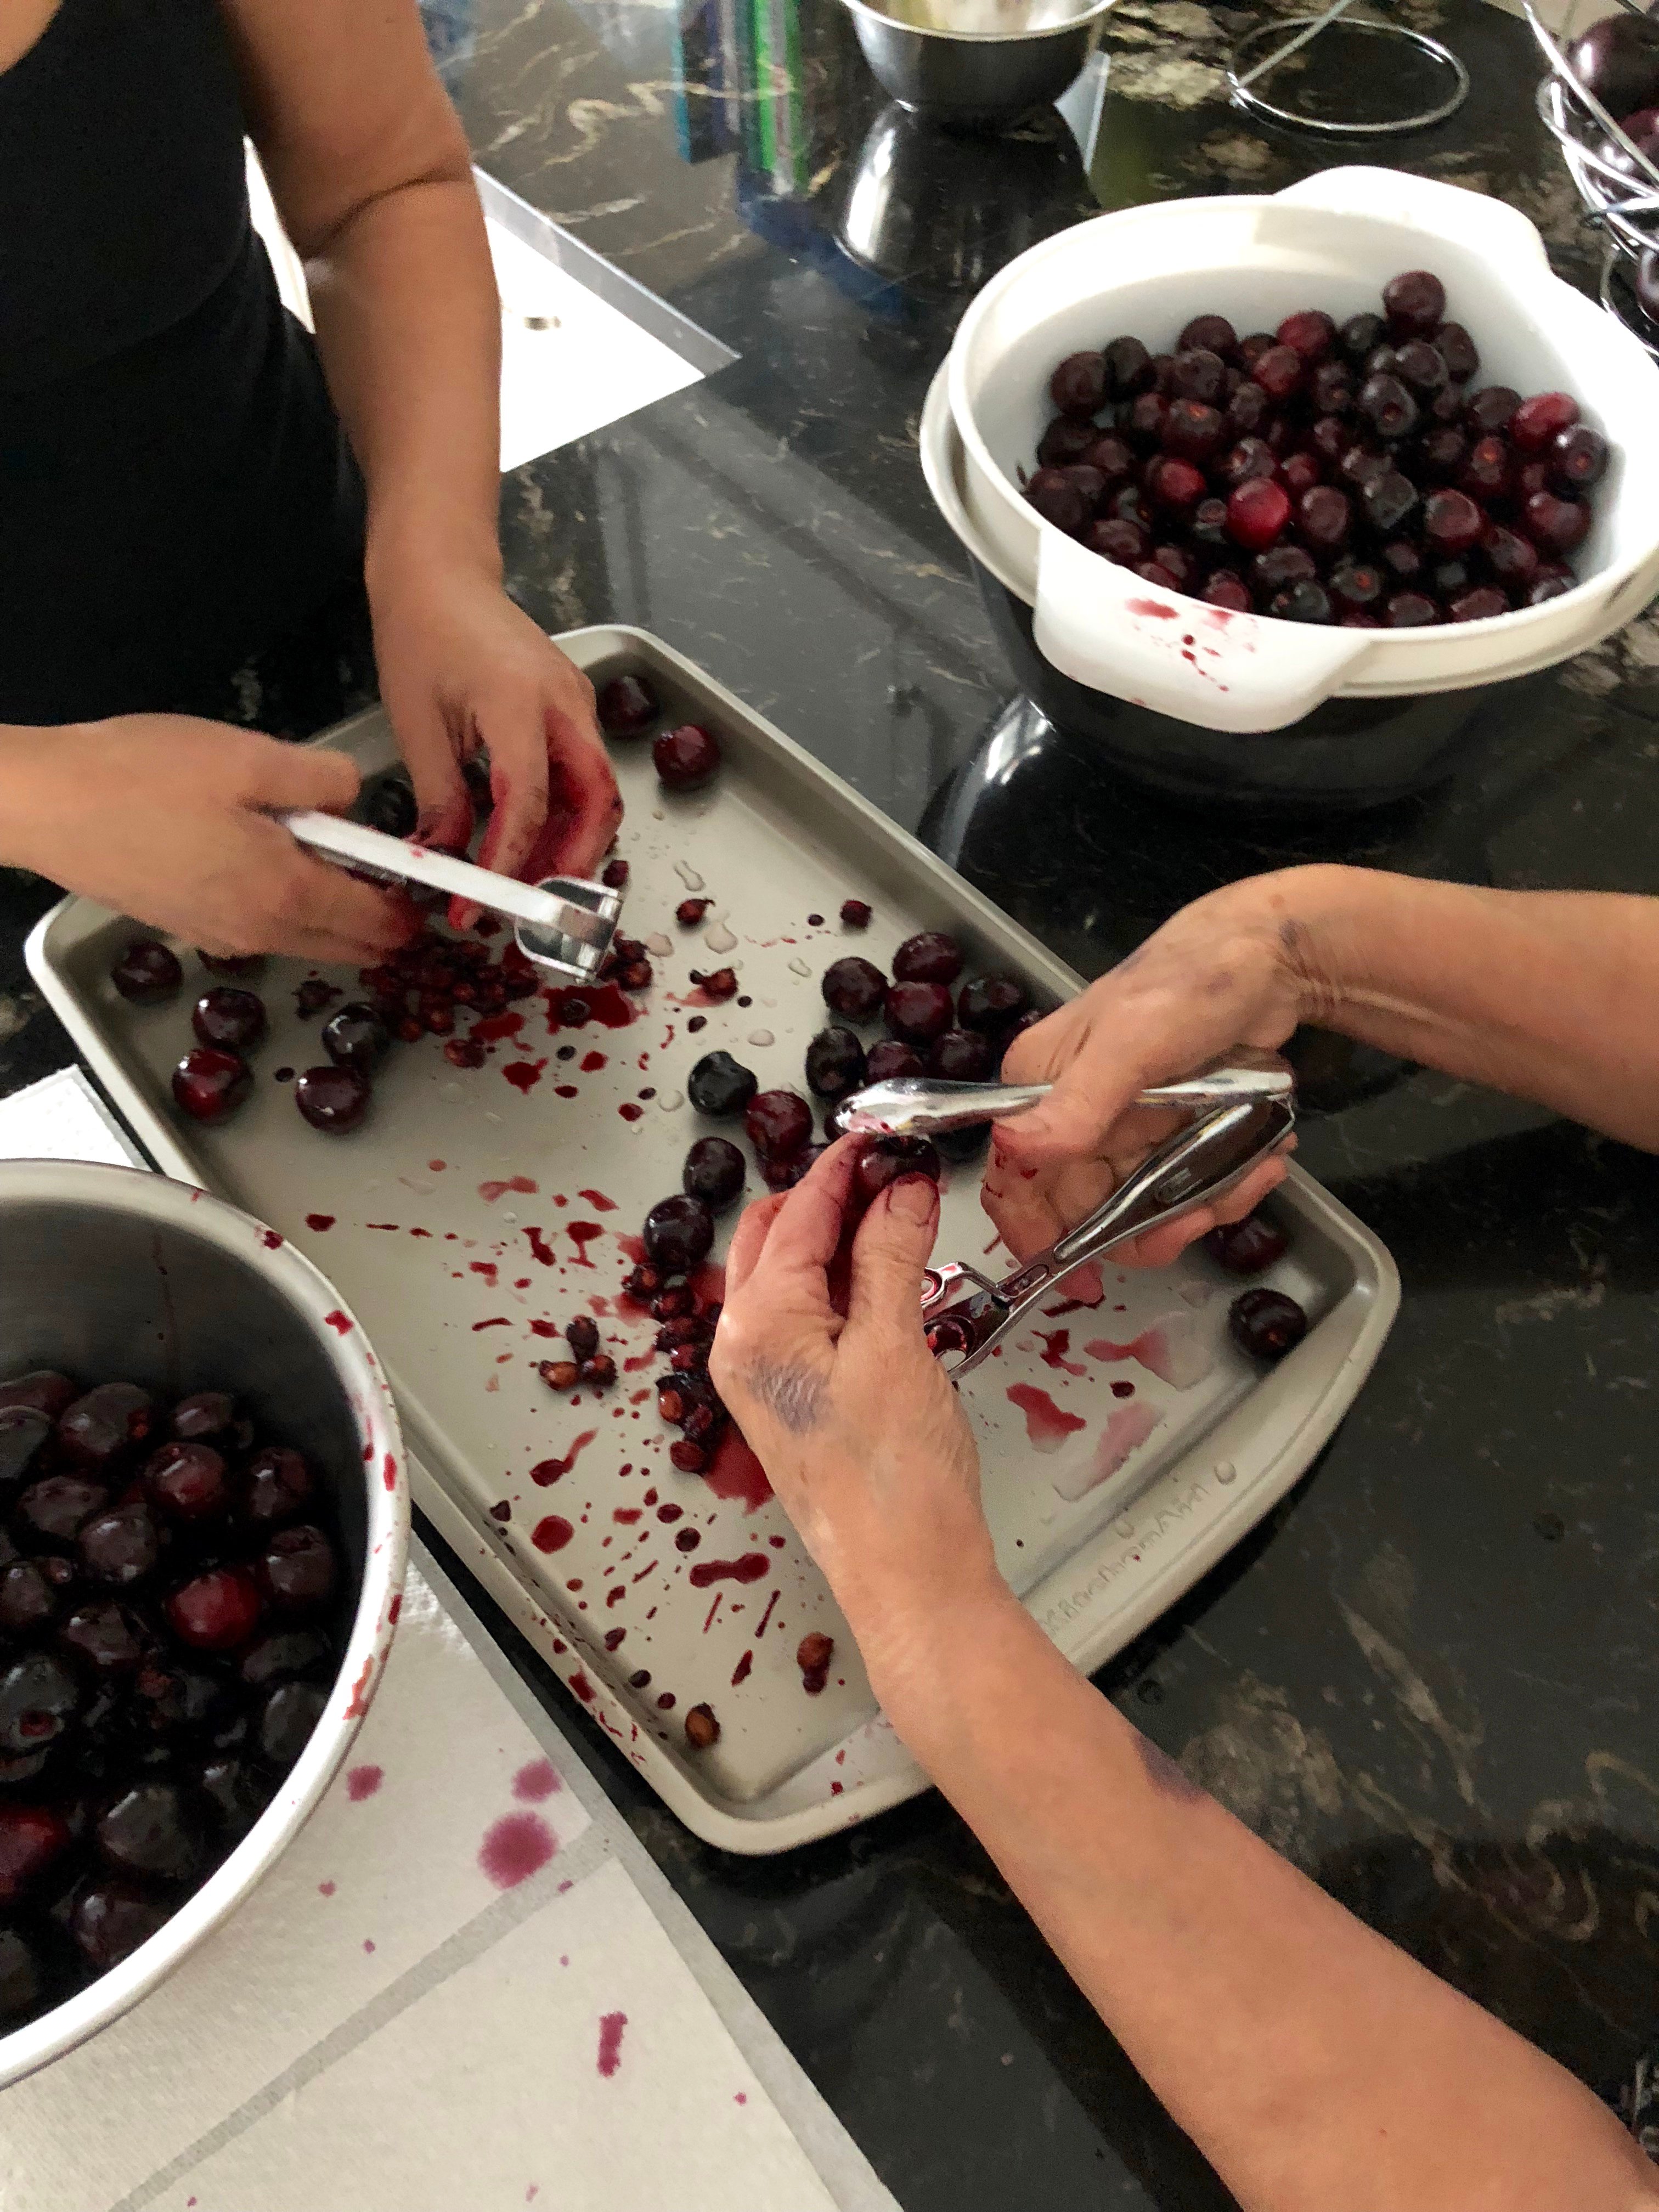 Pitting cherries... Cherry pitter is a great idea!